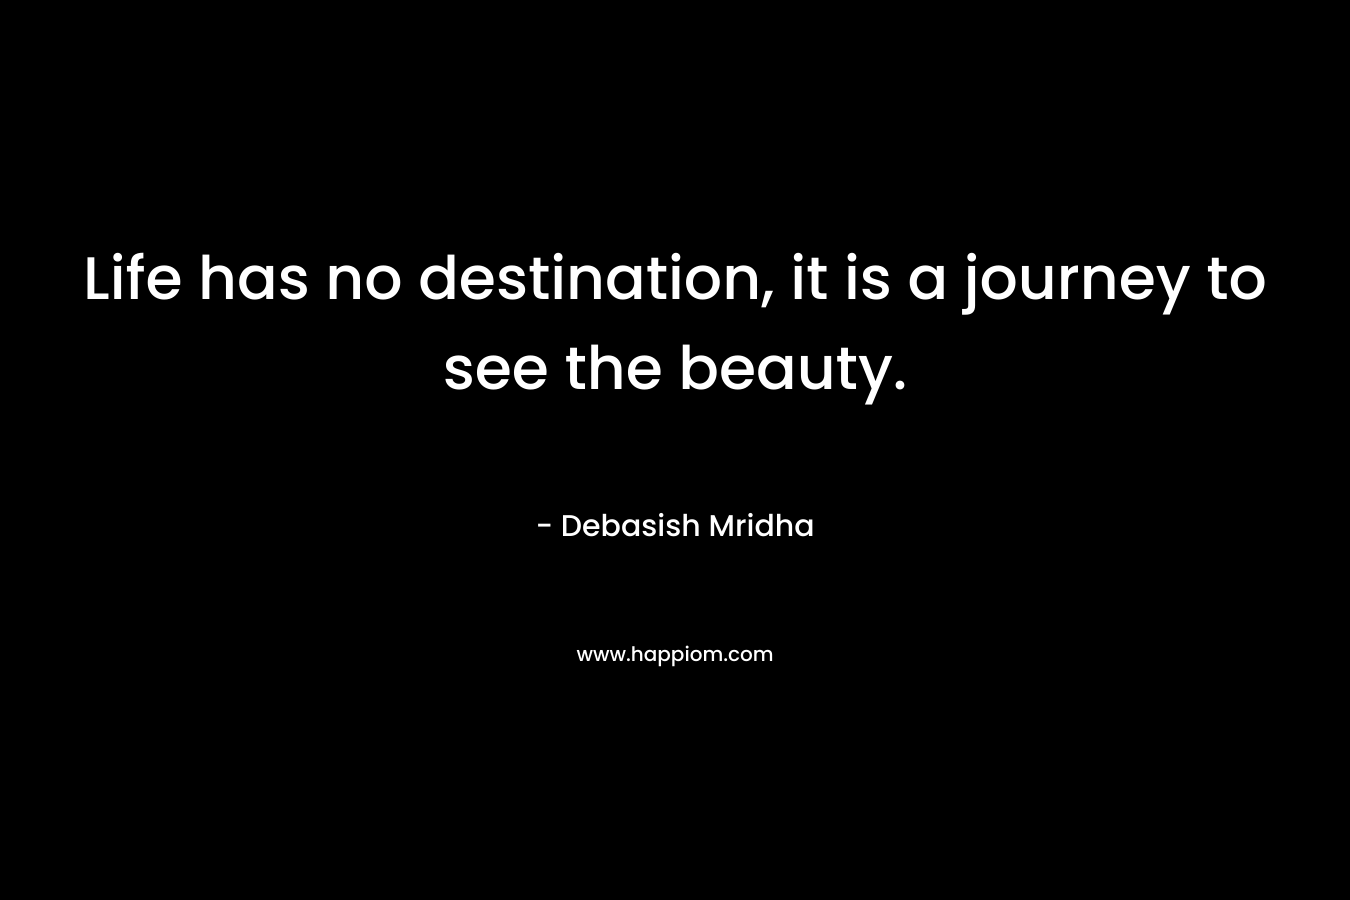 Life has no destination, it is a journey to see the beauty.